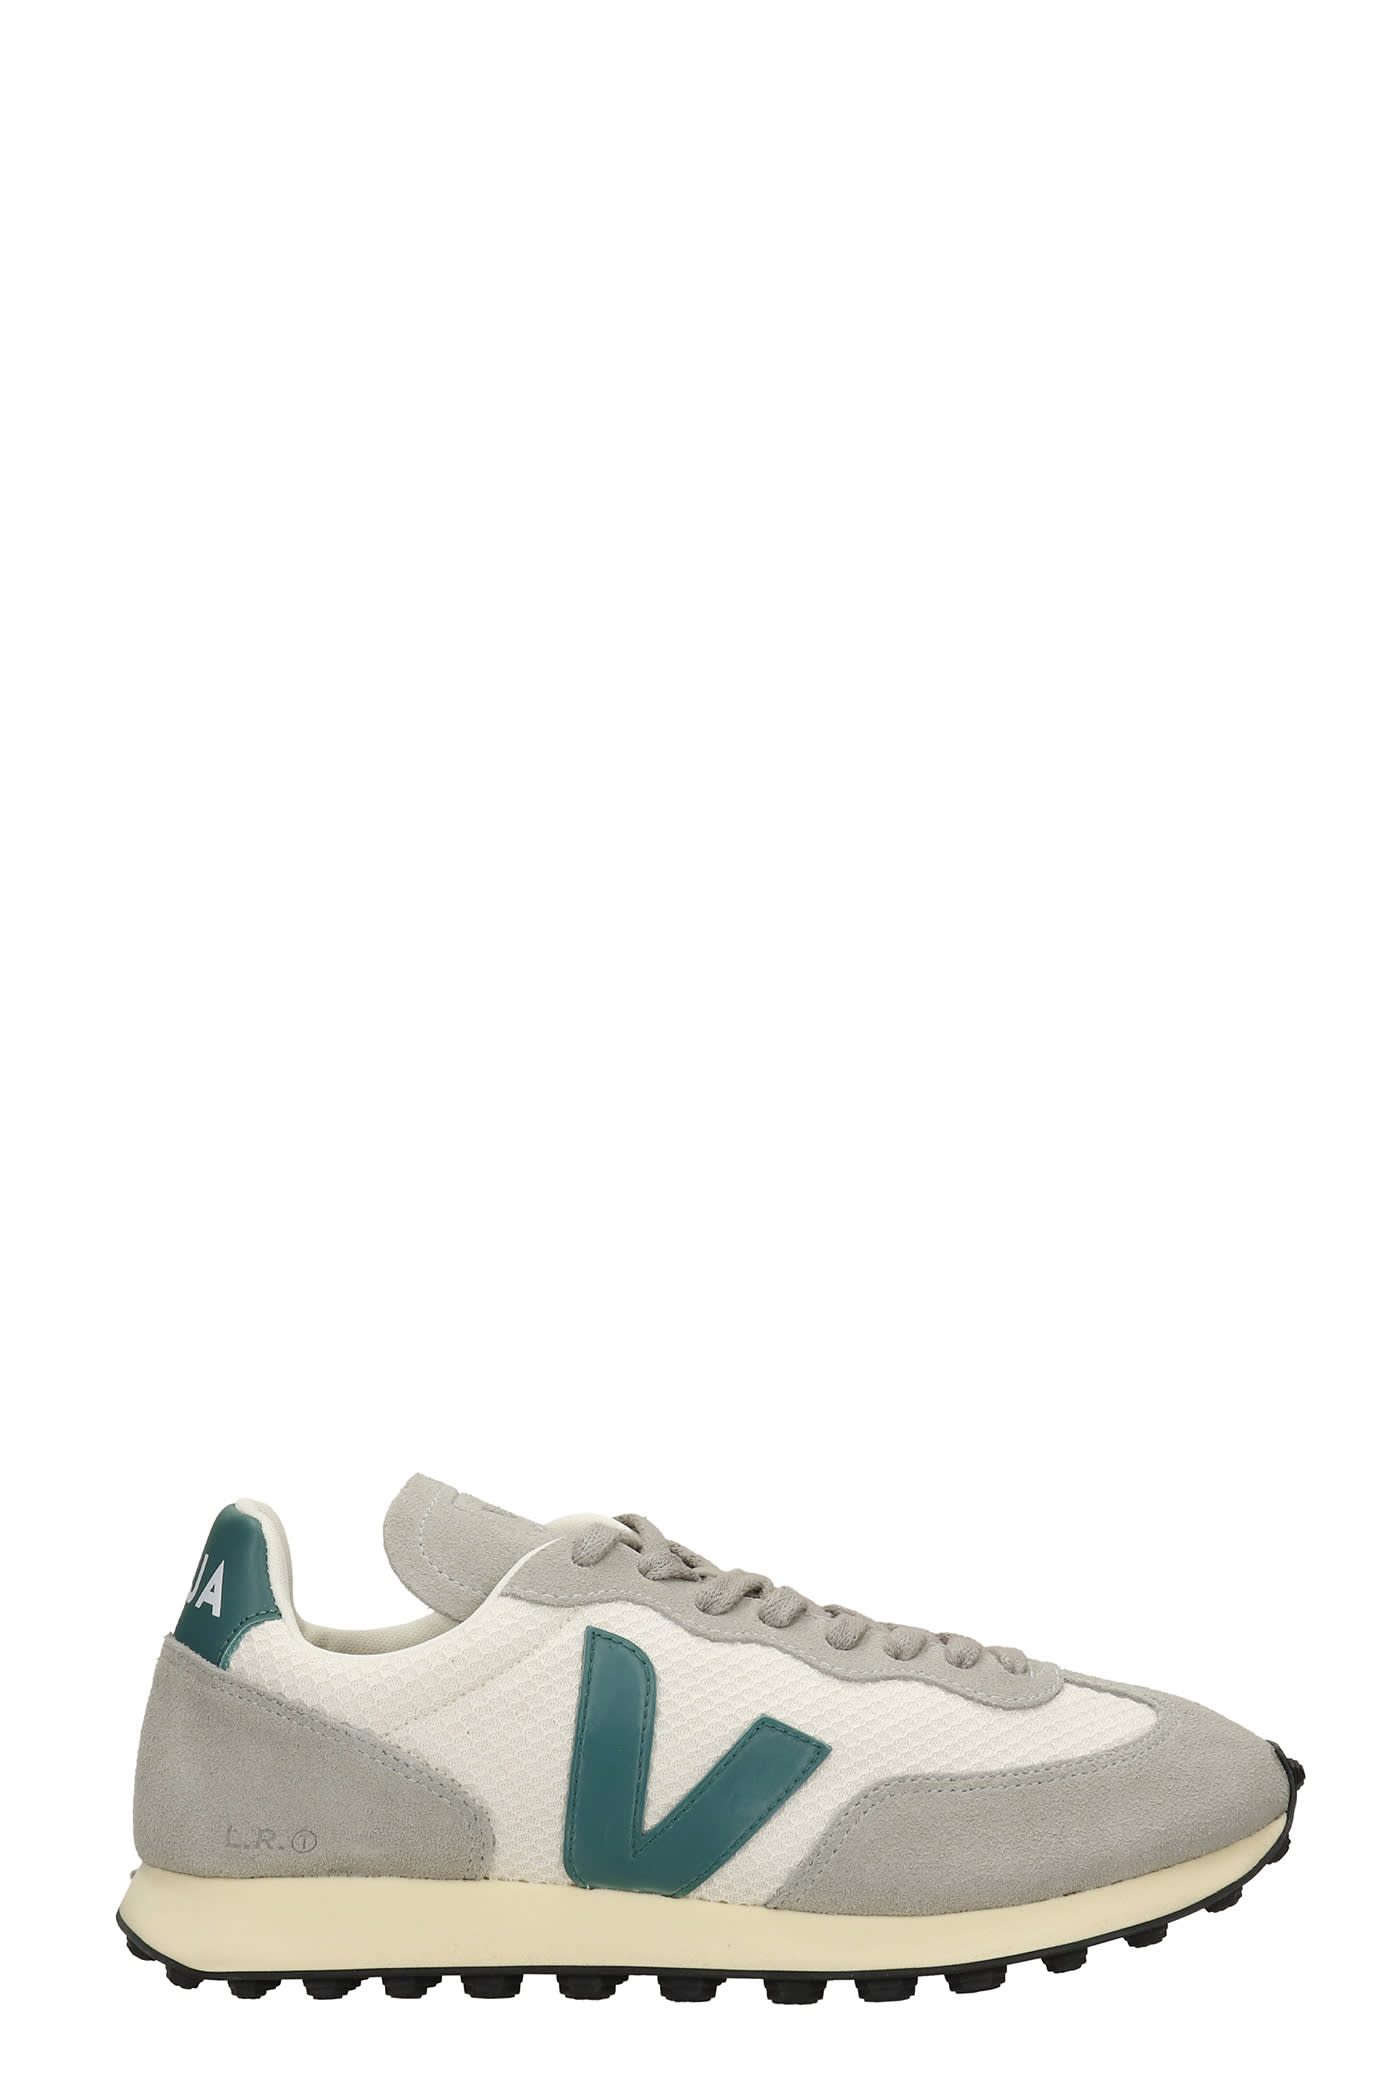 Veja Rio Branco Sneakers In Grey Suede And Fabric